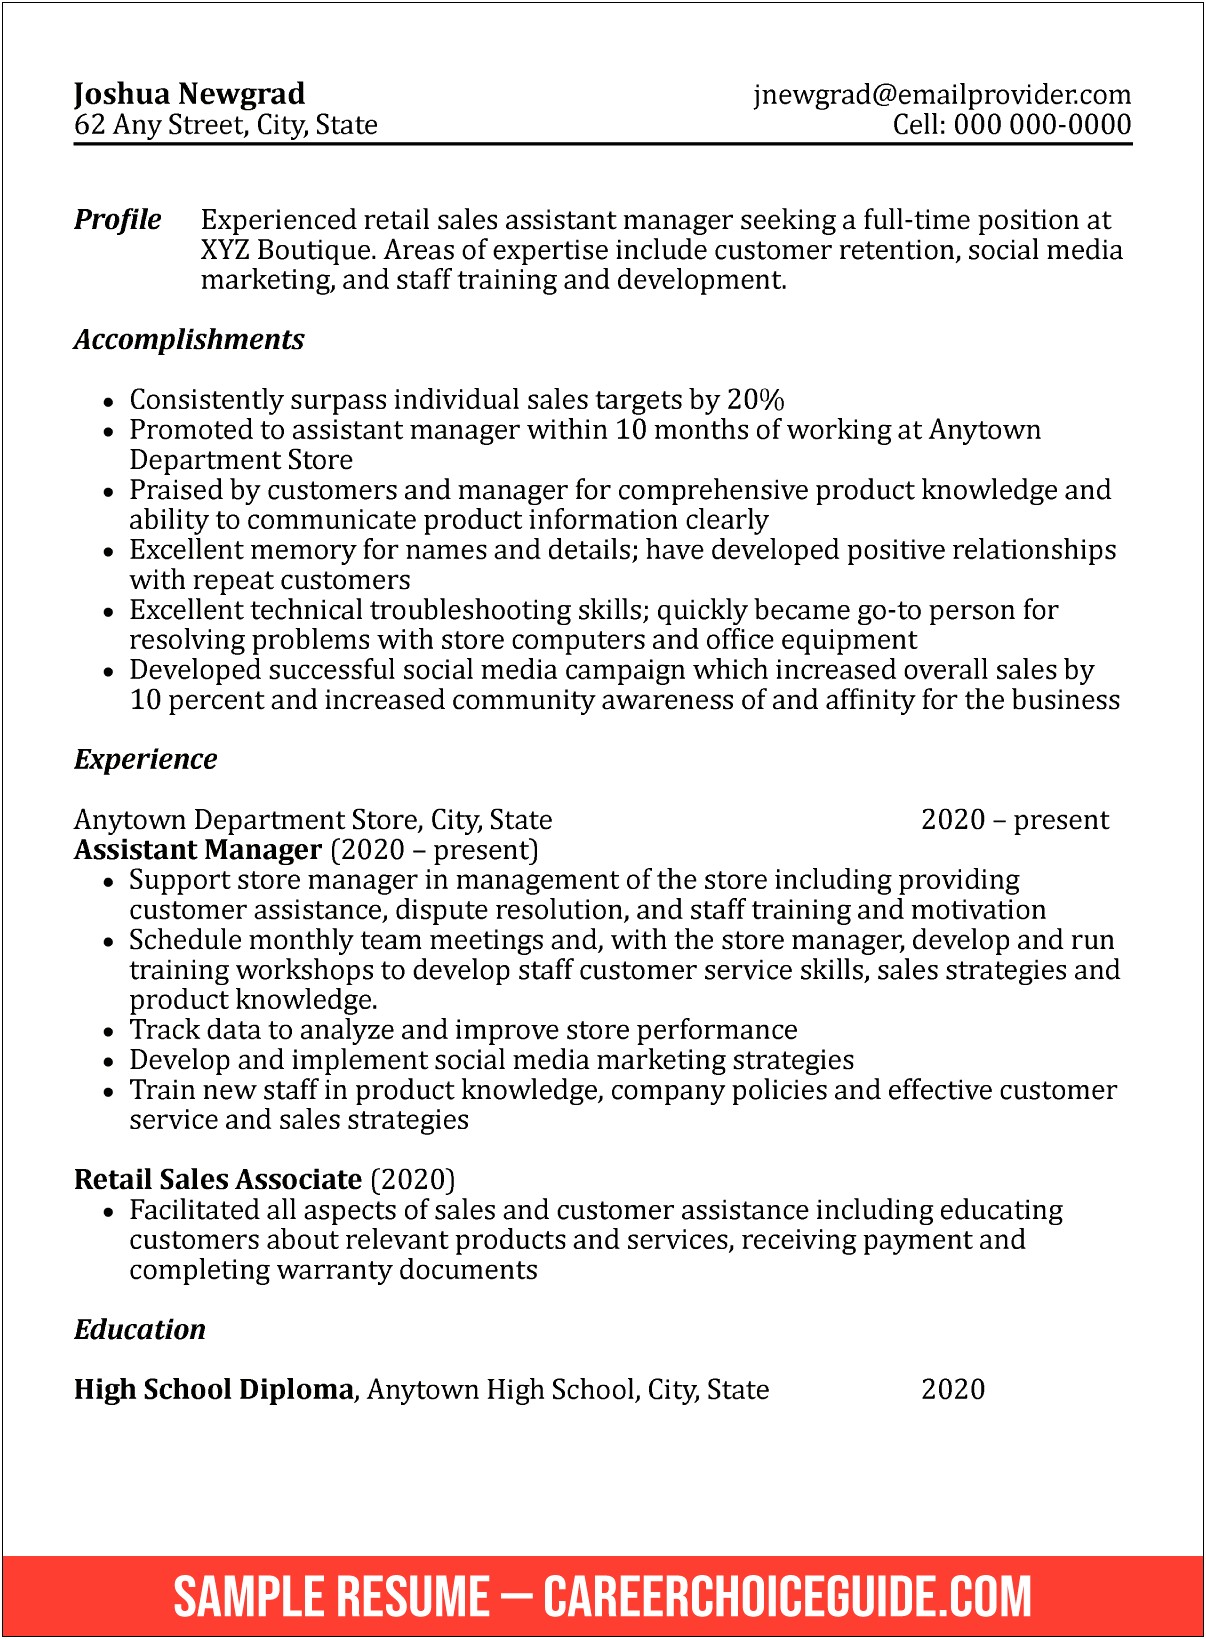 Example Of Resume Education For High School